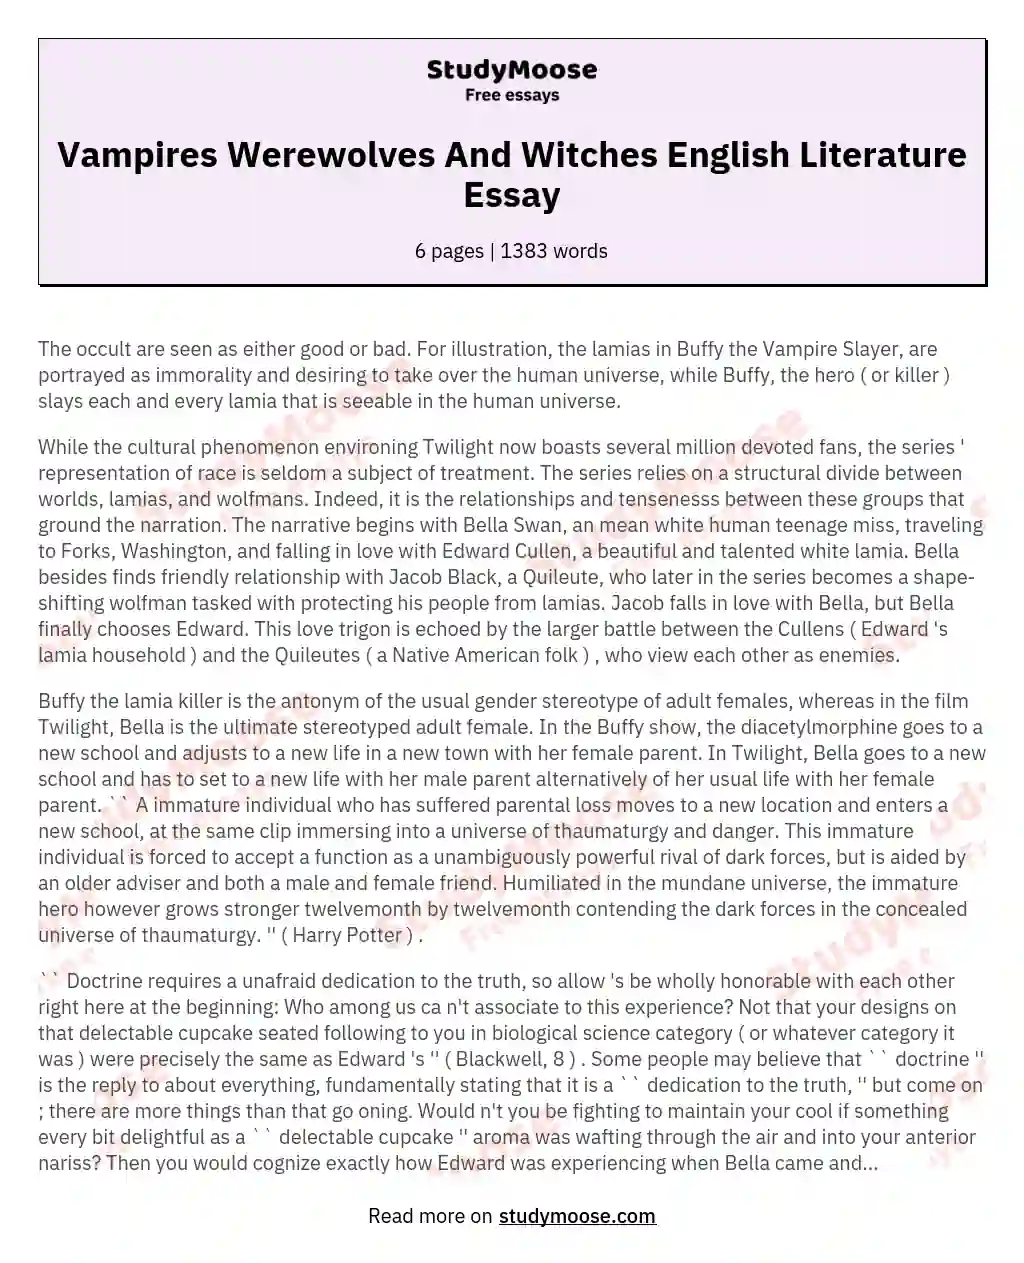 Vampires Werewolves And Witches English Literature Essay essay